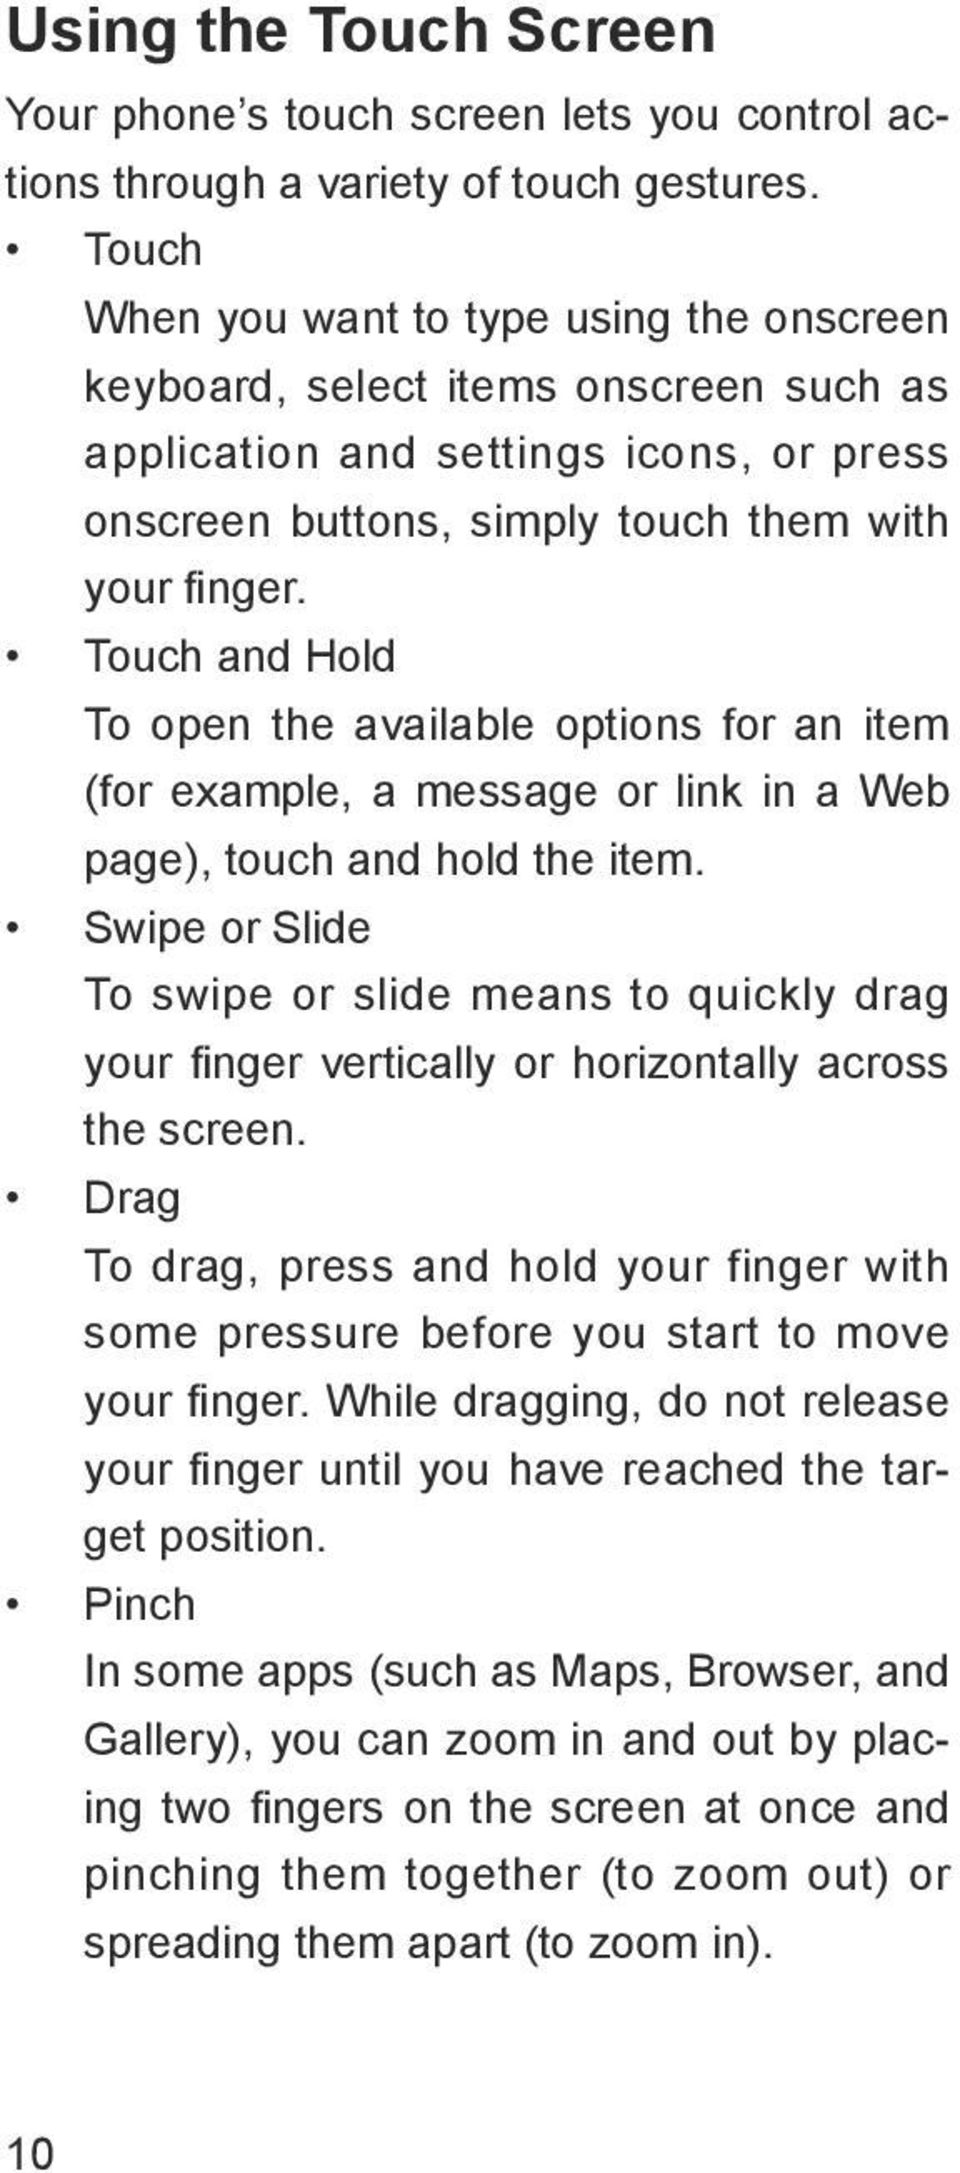 Touch and Hold To open the available options for an item (for example, a message or link in a Web page), touch and hold the item.